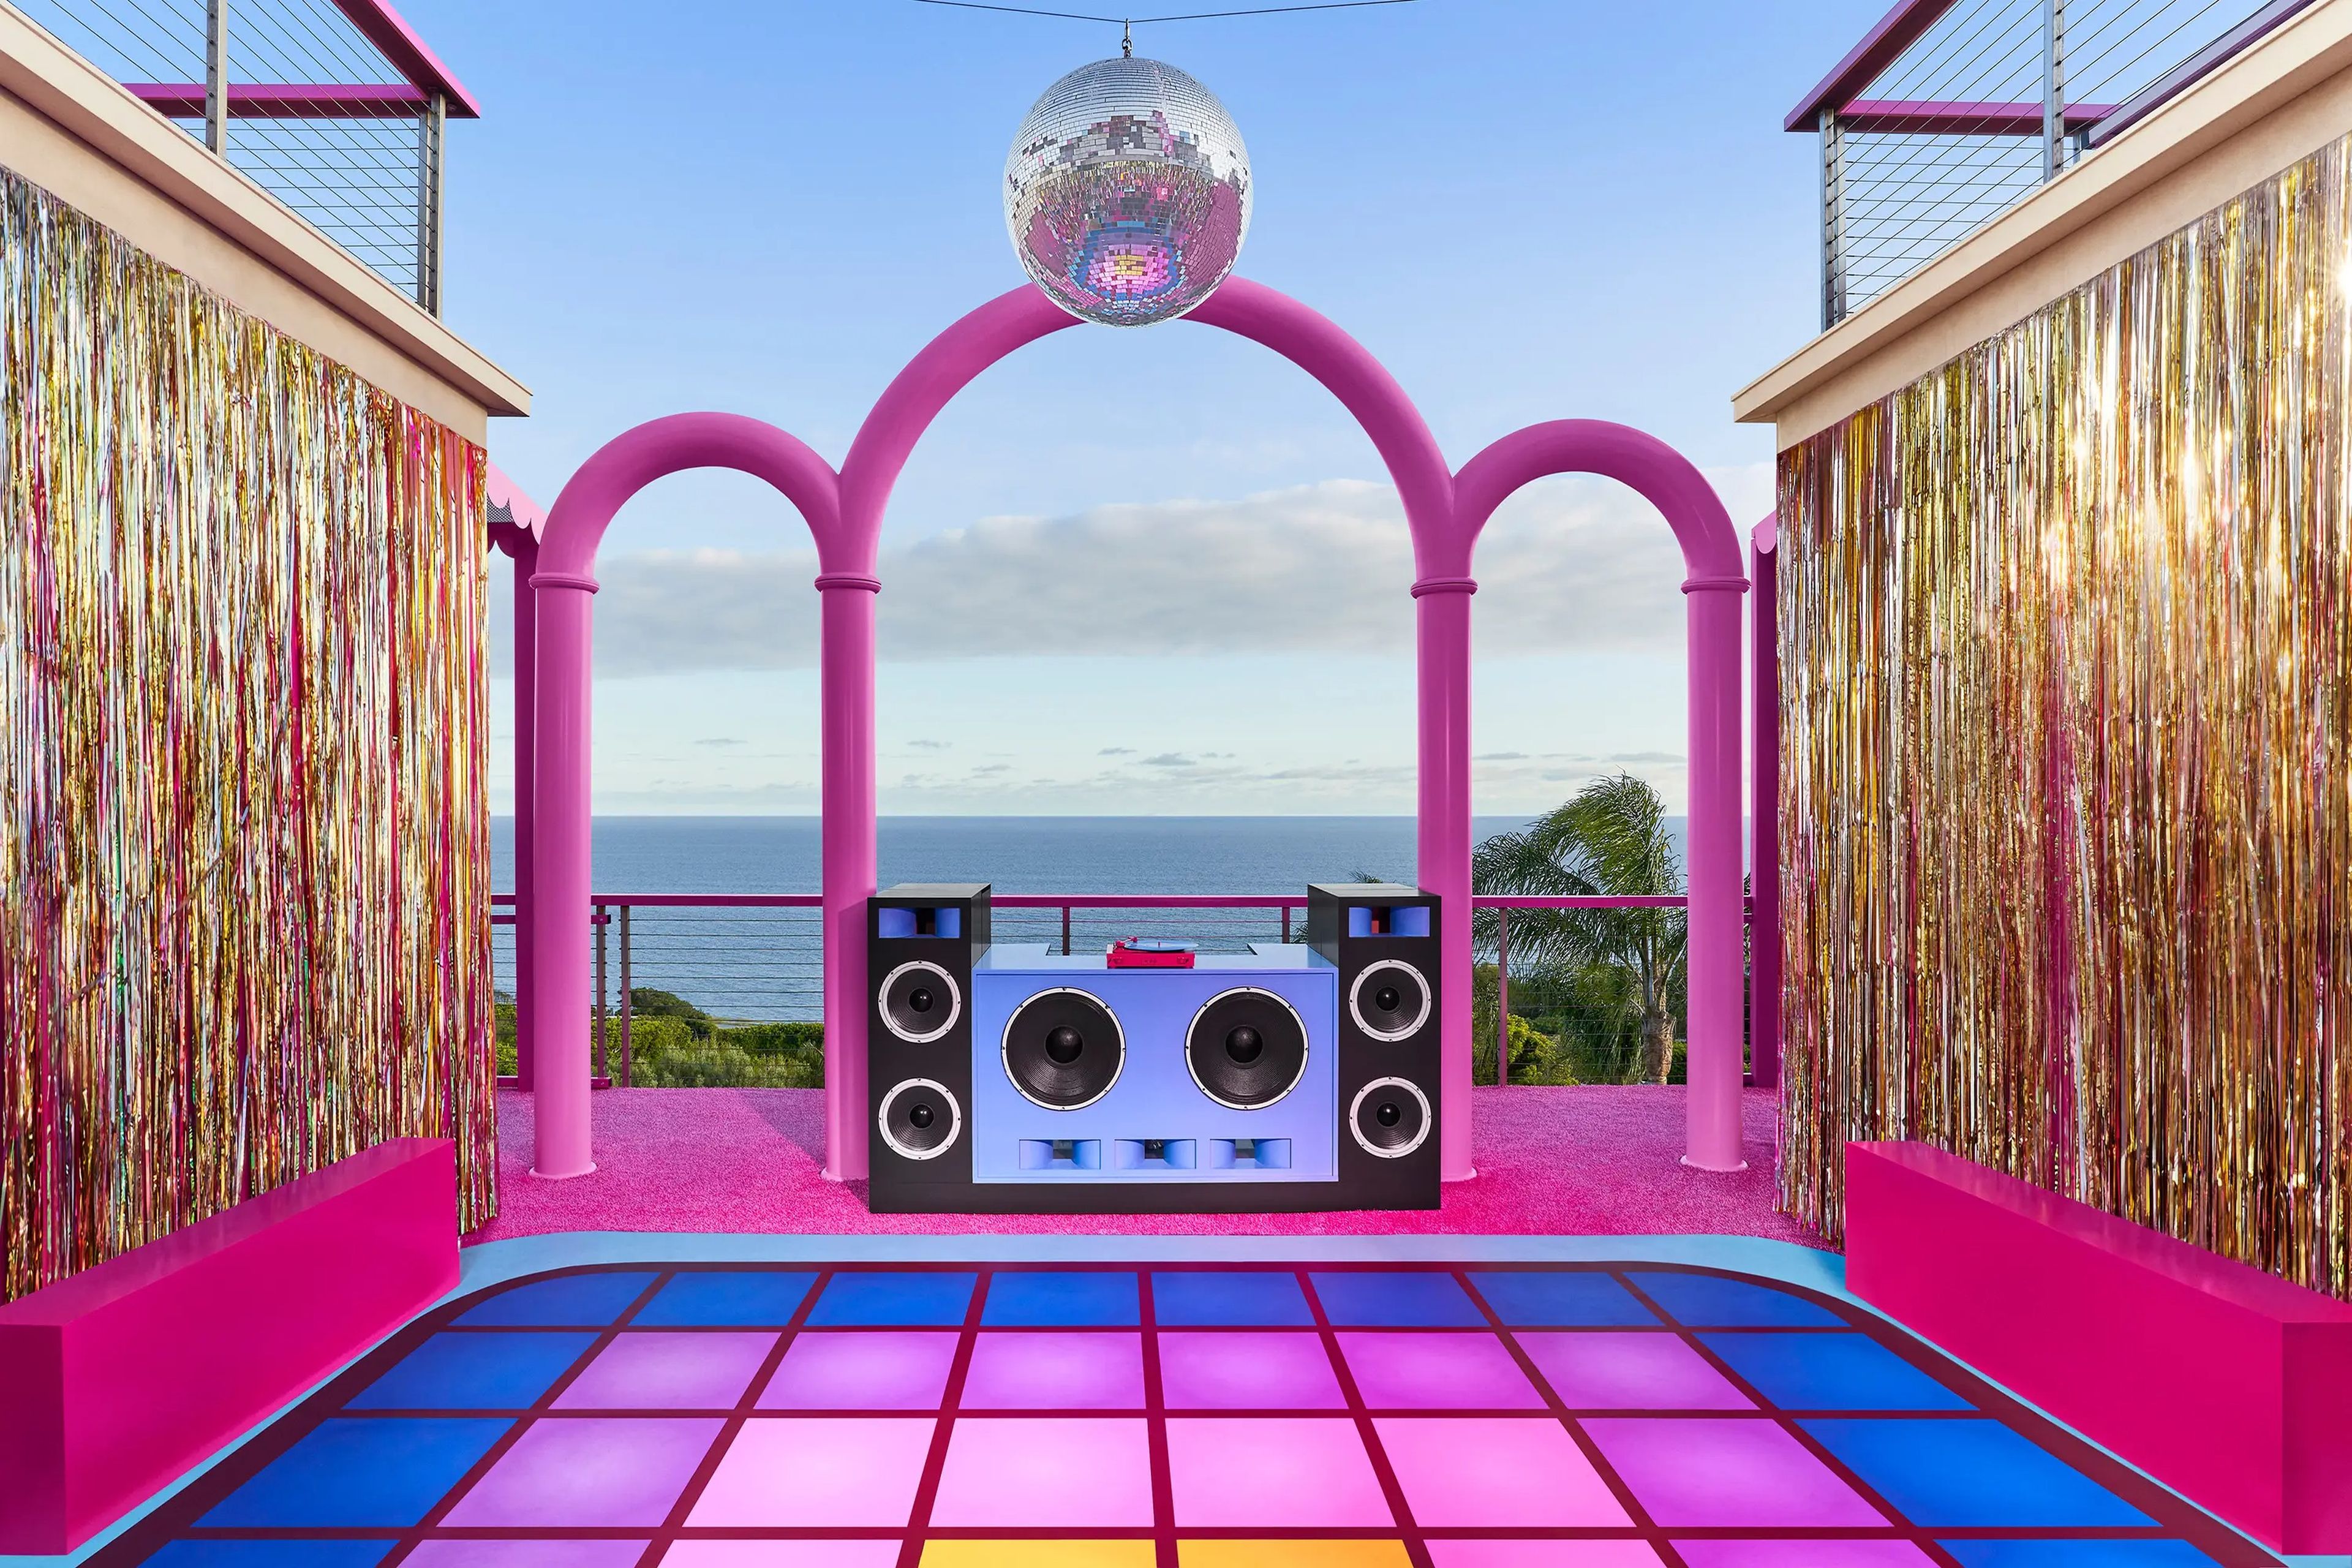 There is an outdoor space that's been transformed into a disco roller rink with neon, tiled floors and a DJ speaker set.